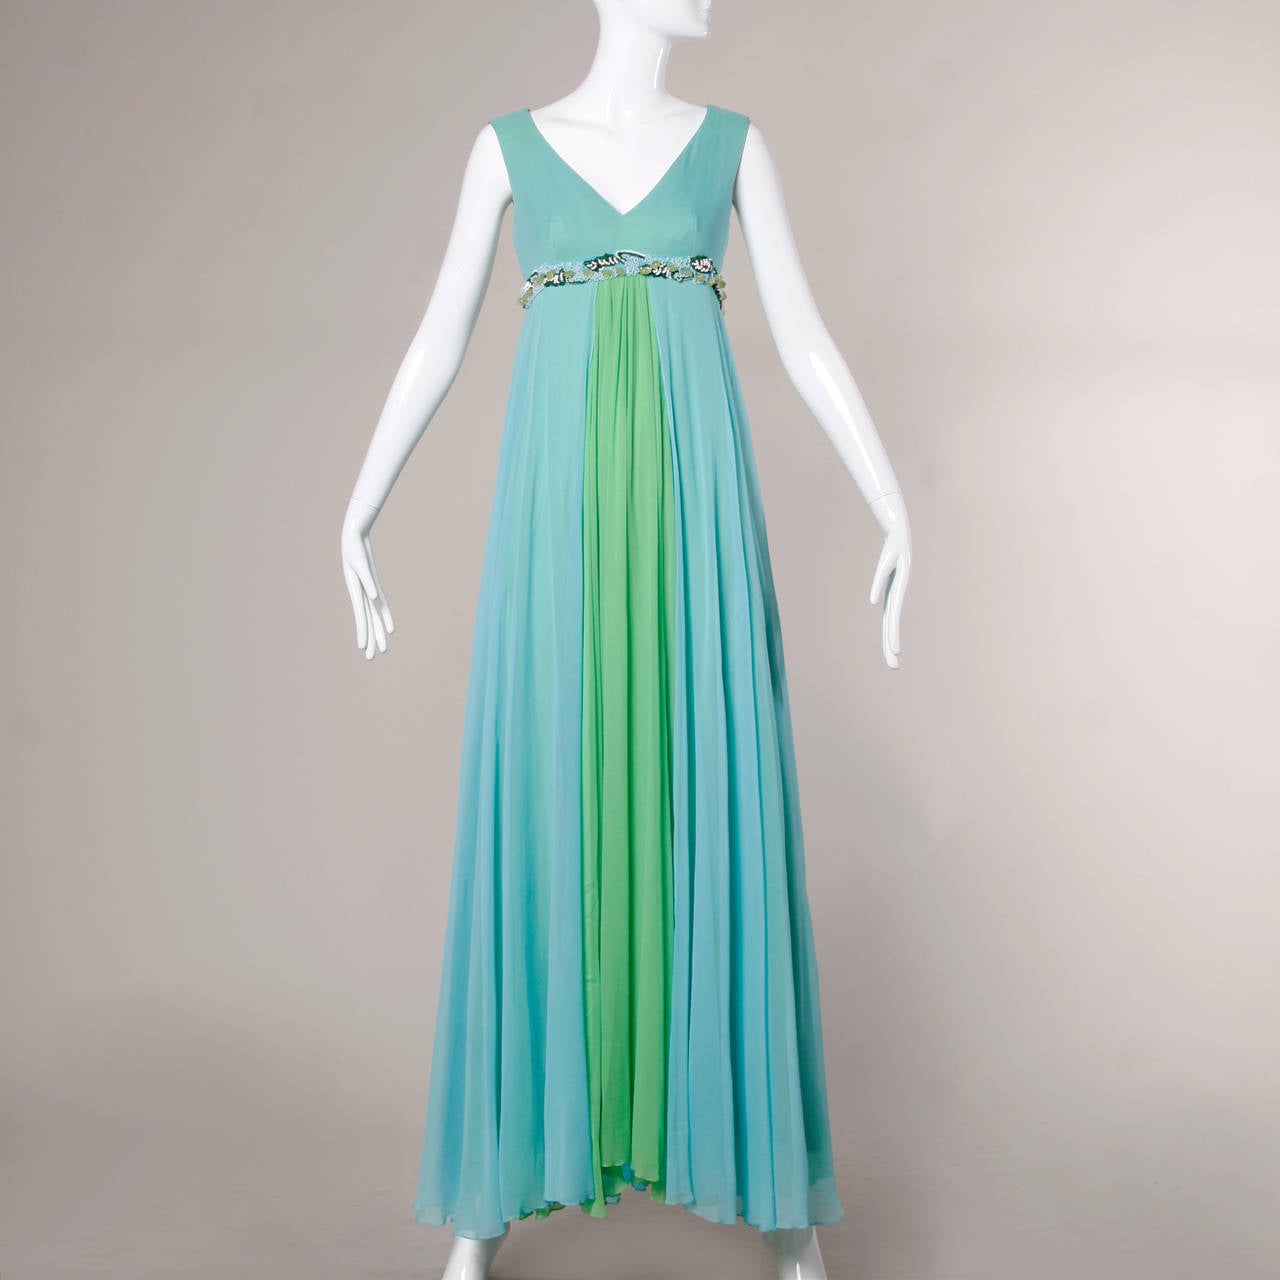 1971 Unworn Beaded Color Block Gown with Original Tags Attached 2